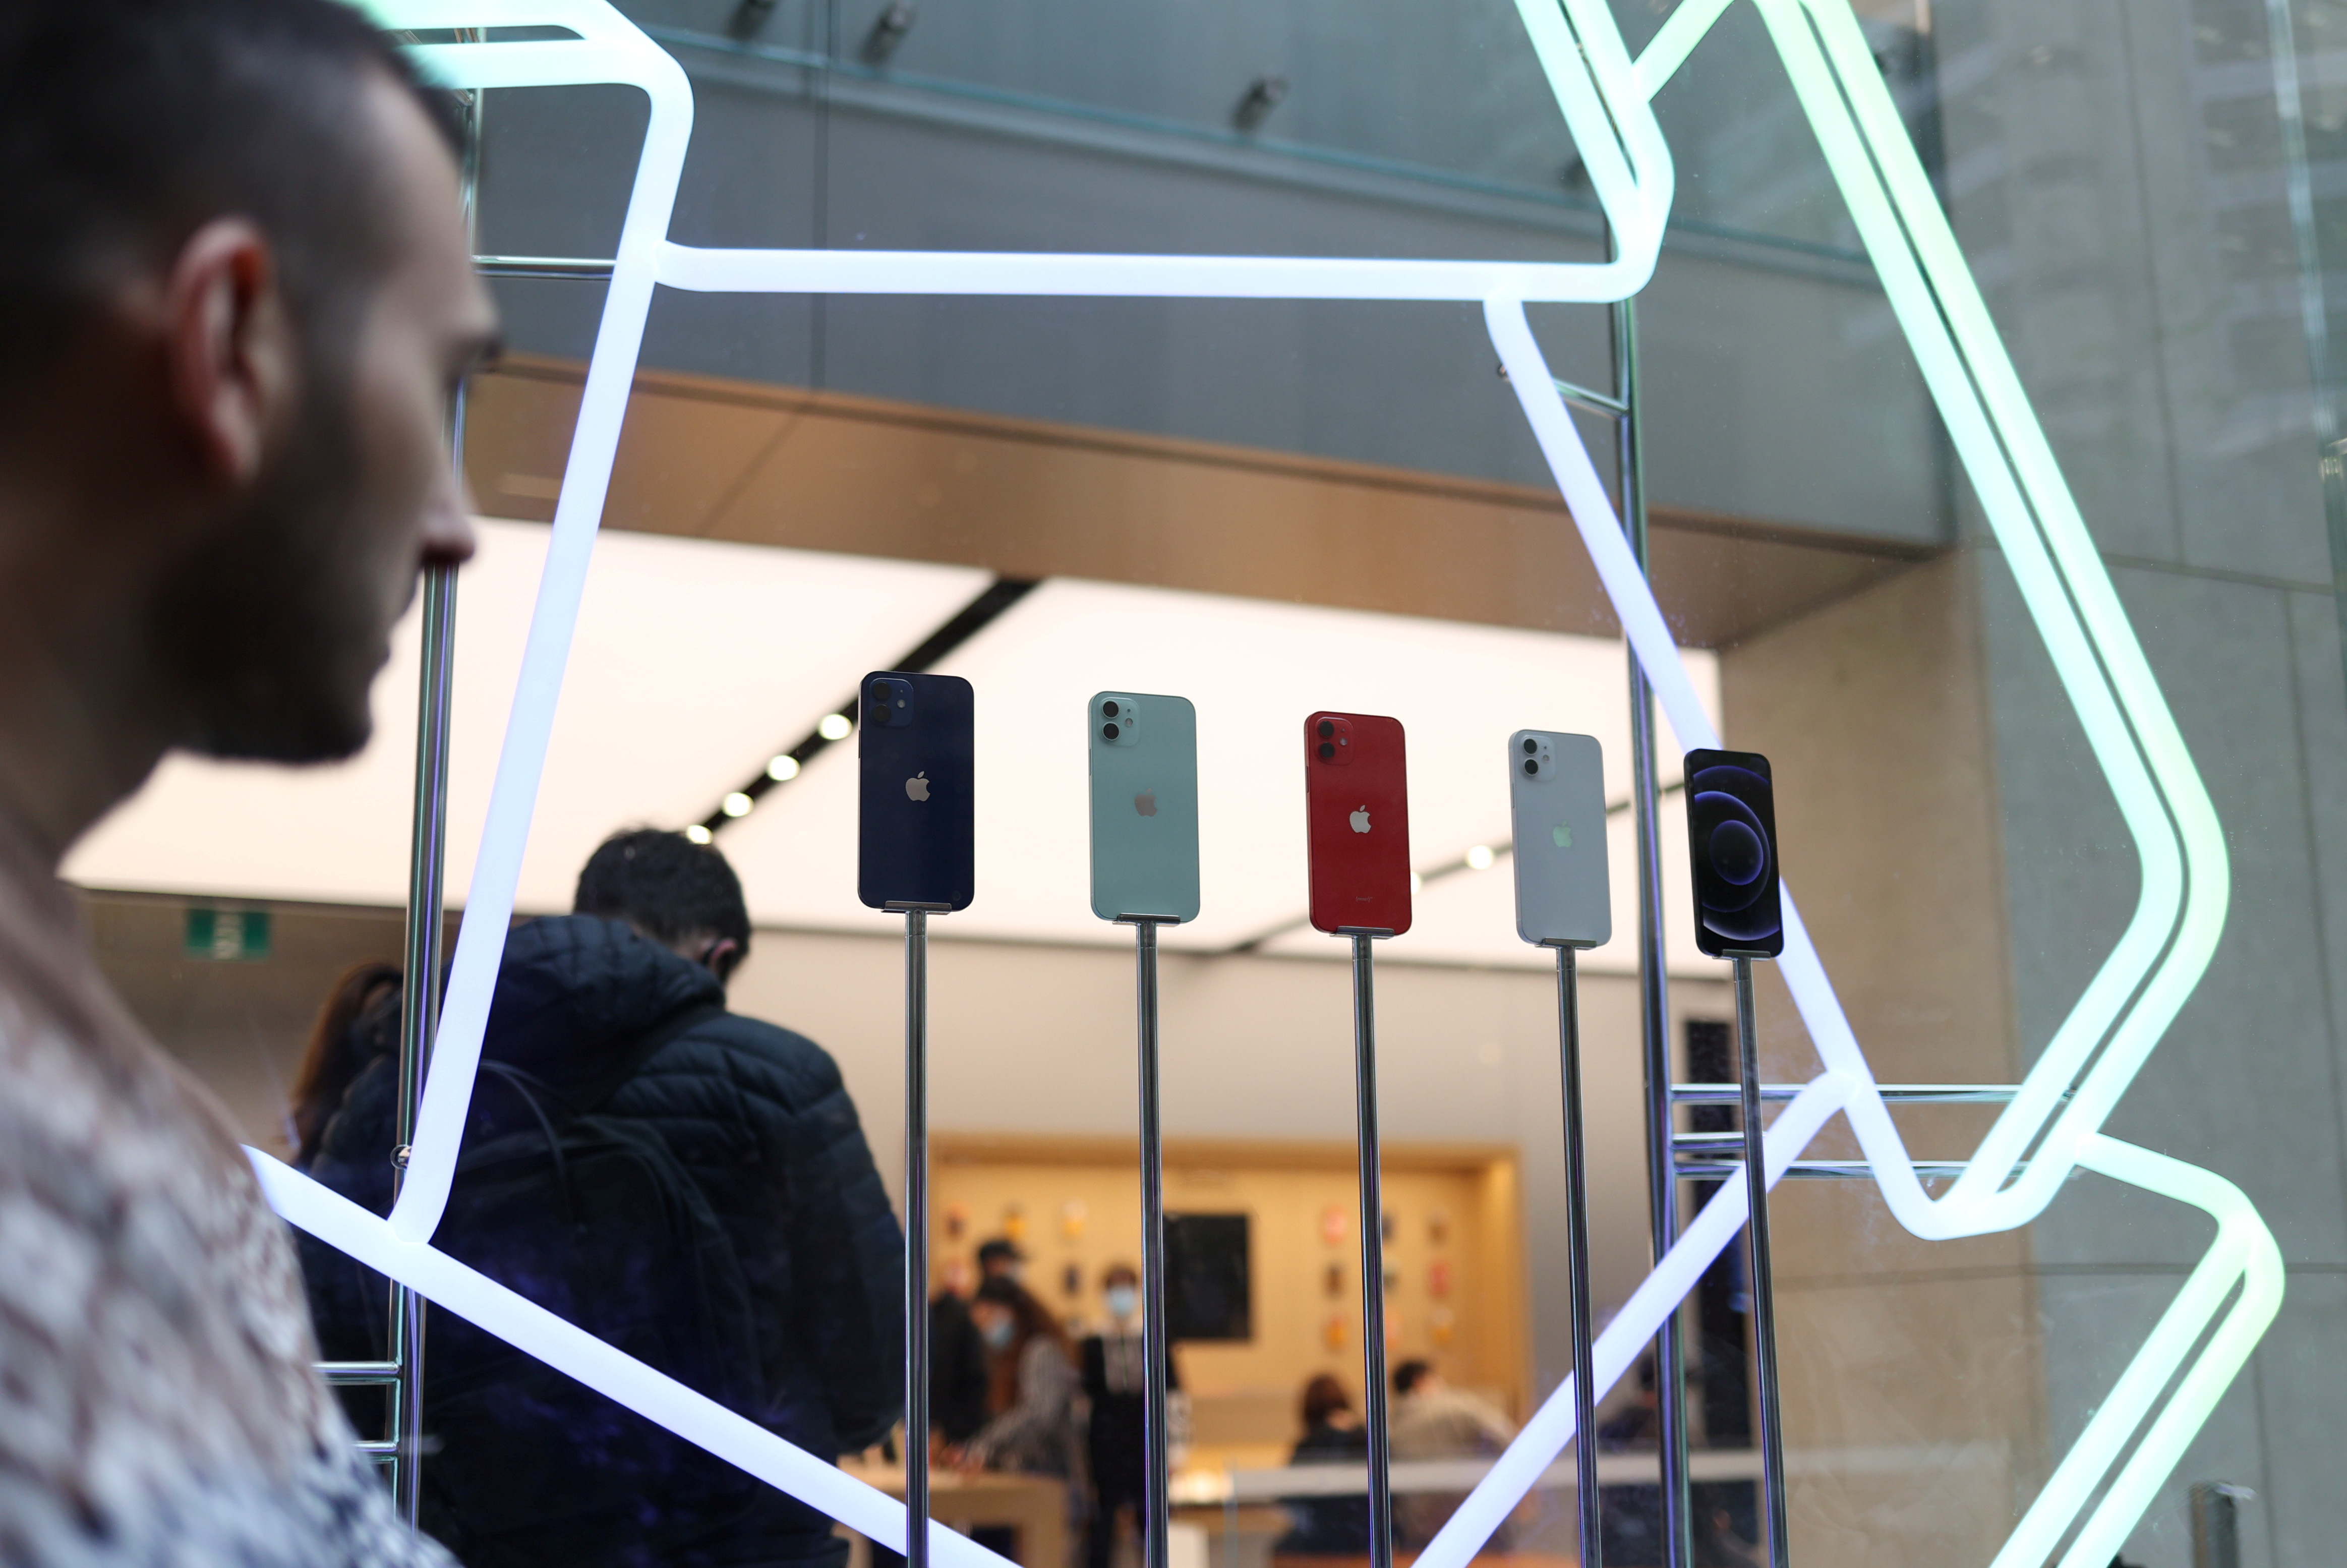 A shopper looks at an iPhone 12 display while waiting in line to enter an Apple Store in the city centre as the state of New South Wales continues to report low case numbers of the coronavirus disease (COVID-19) in Sydney, Australia, October 26, 2020. REUTERS/Loren Elliott